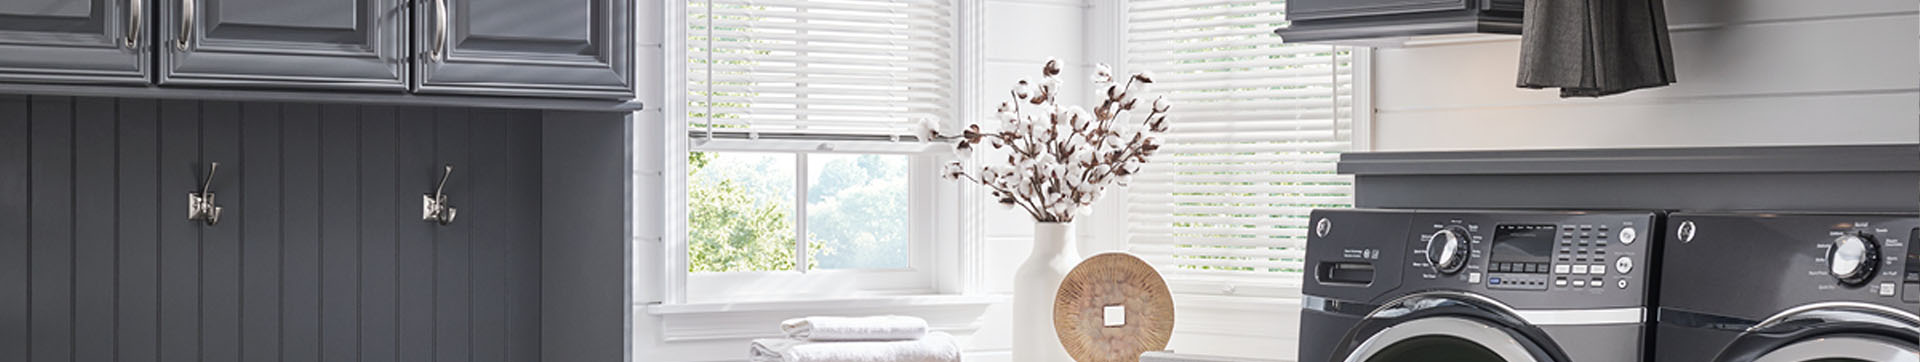 Laundry room shutters